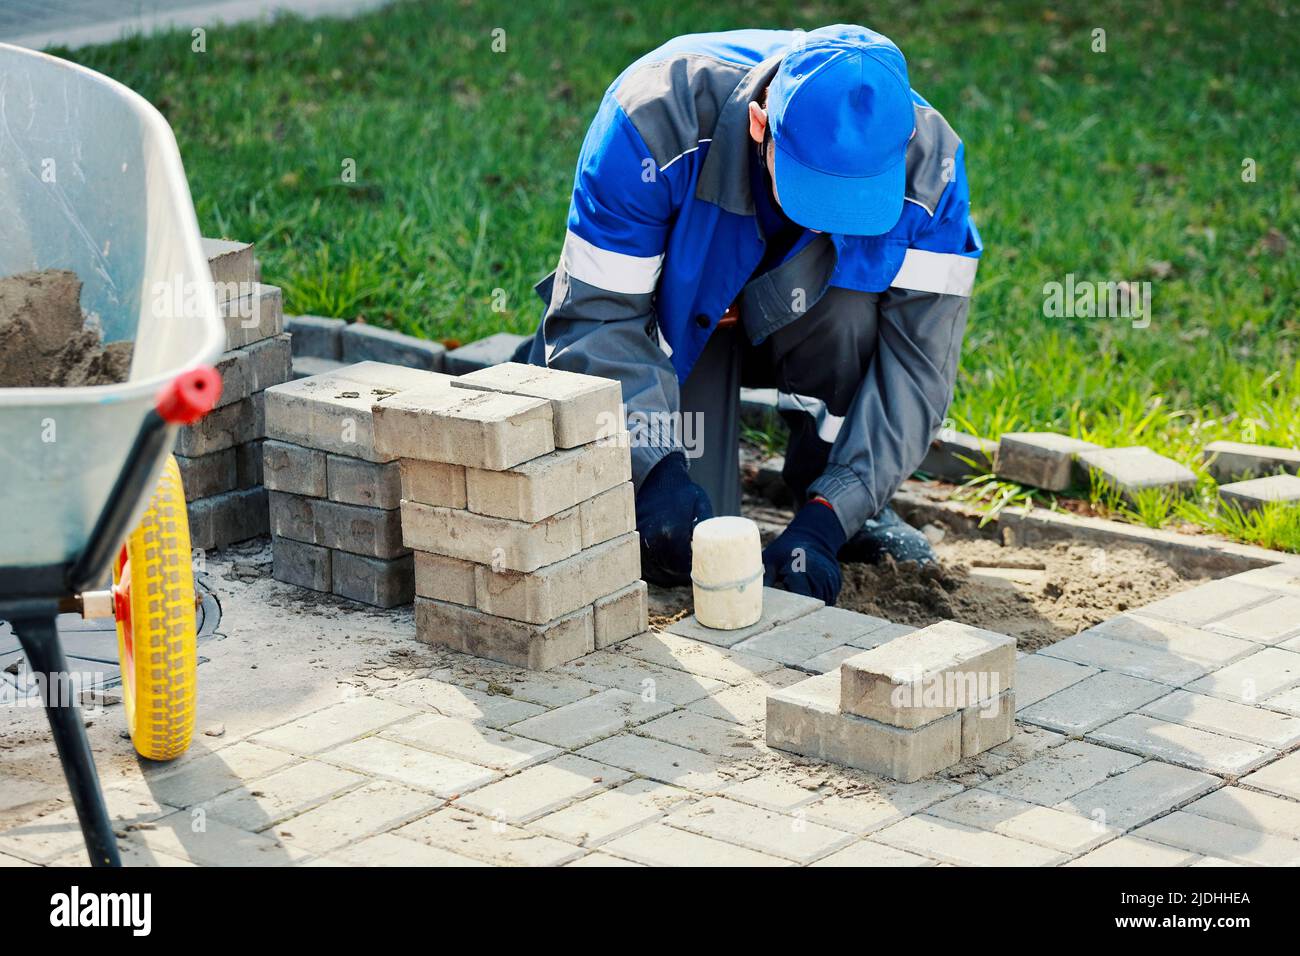 Bricklayer lays paving slabs outside. Working man performs landscaping. Builder lays out sidewalk with stone blocks. Authentic workflow. Hard work in old age. Stock Photo